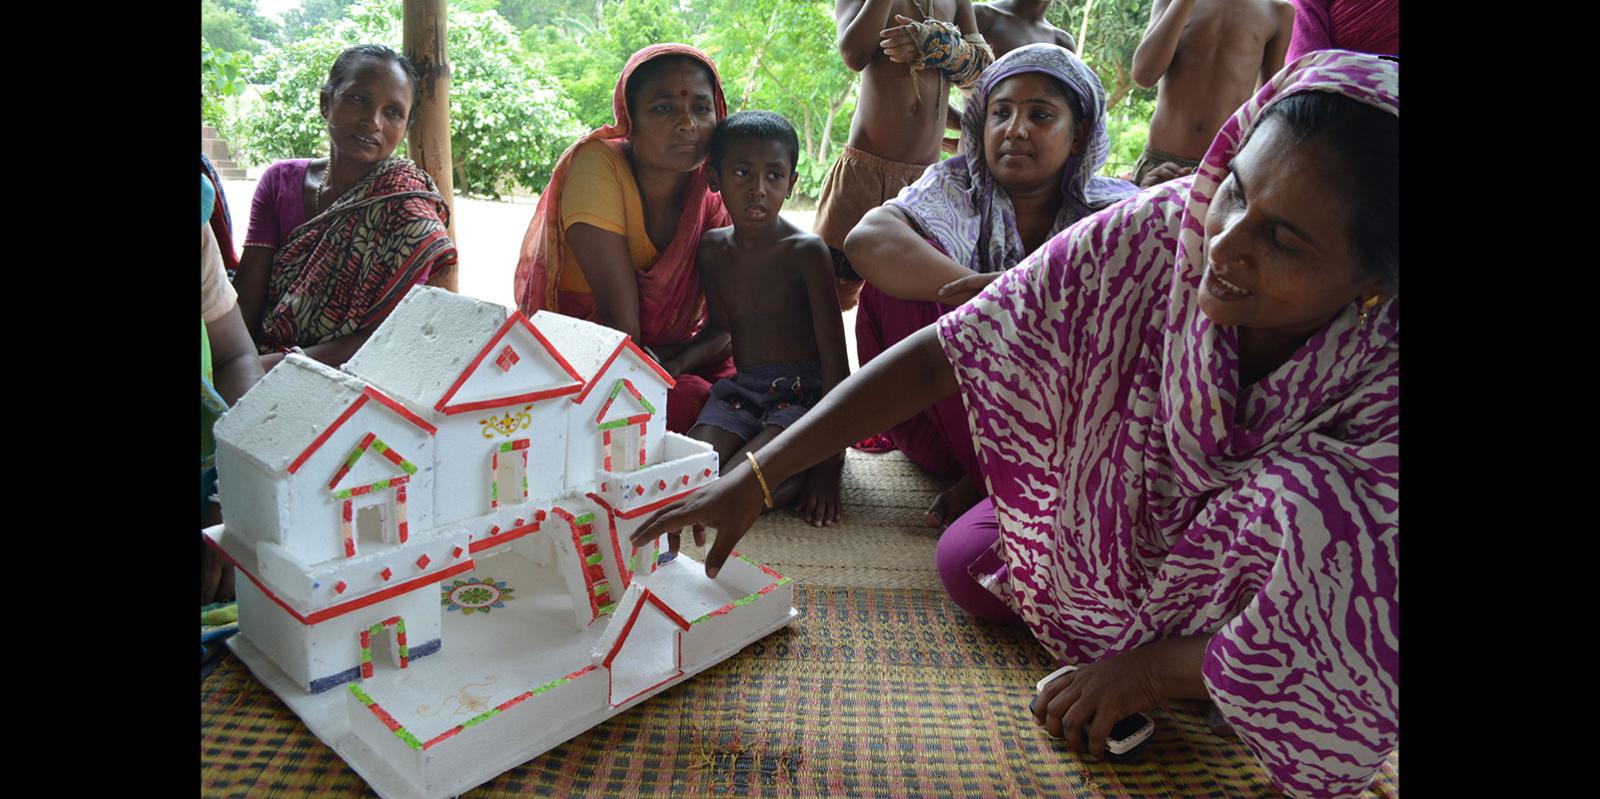 Woman showing an architecture model to a community